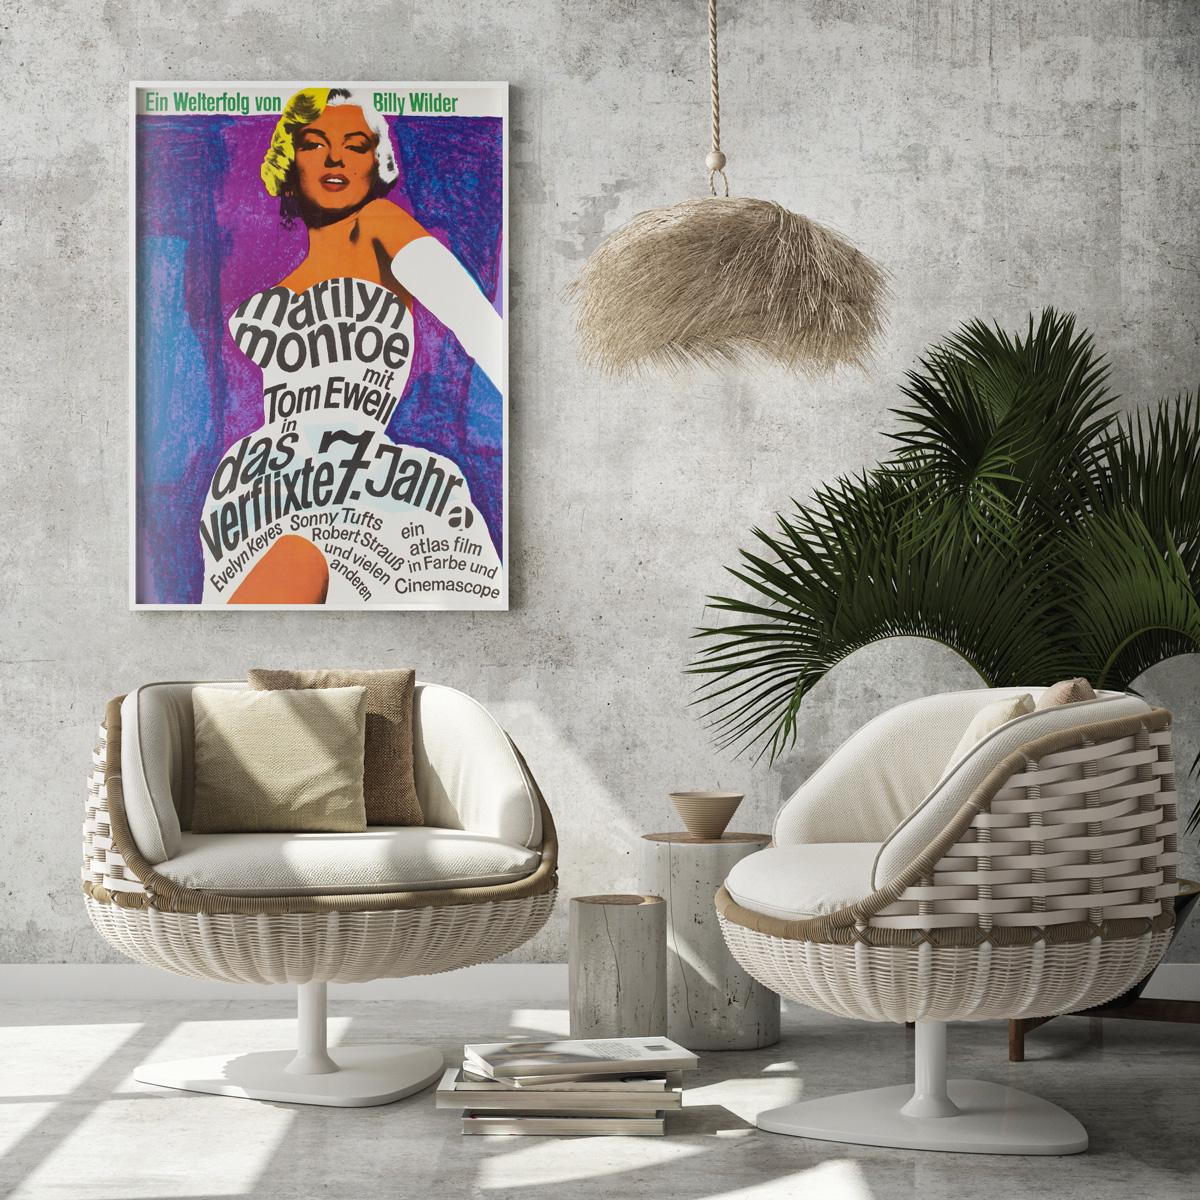 Fabulous pop-art design by Dorothea Fischer-Nosbisch features on the 1966 re-release German film poster for Marilyn Monroe classic The Seven Year Itch. Love it!

This vintage movie poster is sized 23 x 33 inches, it will be sent rolled (unframed).